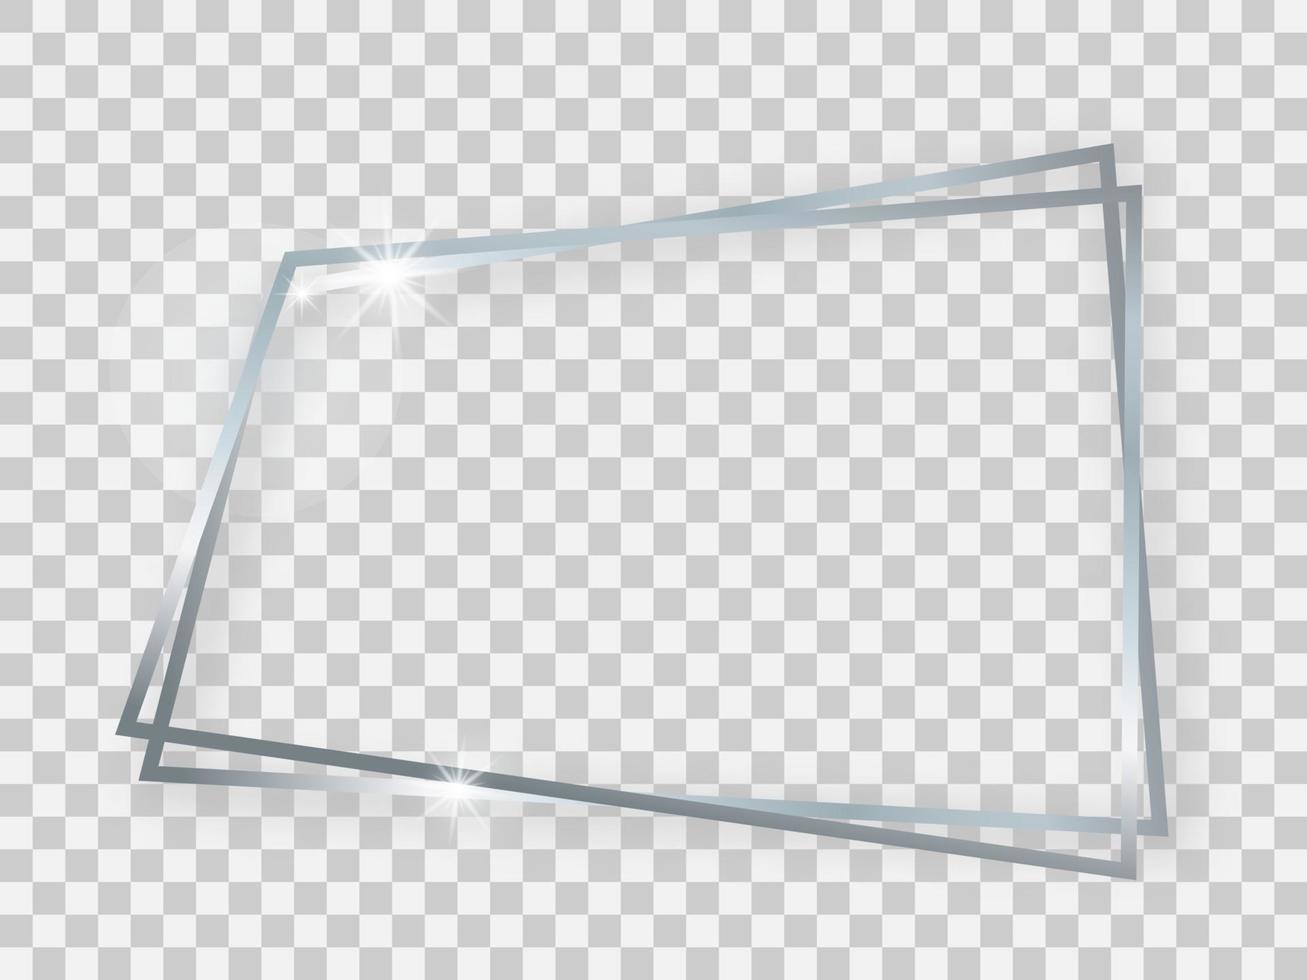 Double silver shiny trapezoid frame with glowing effects and shadows on transparent background. Vector illustration